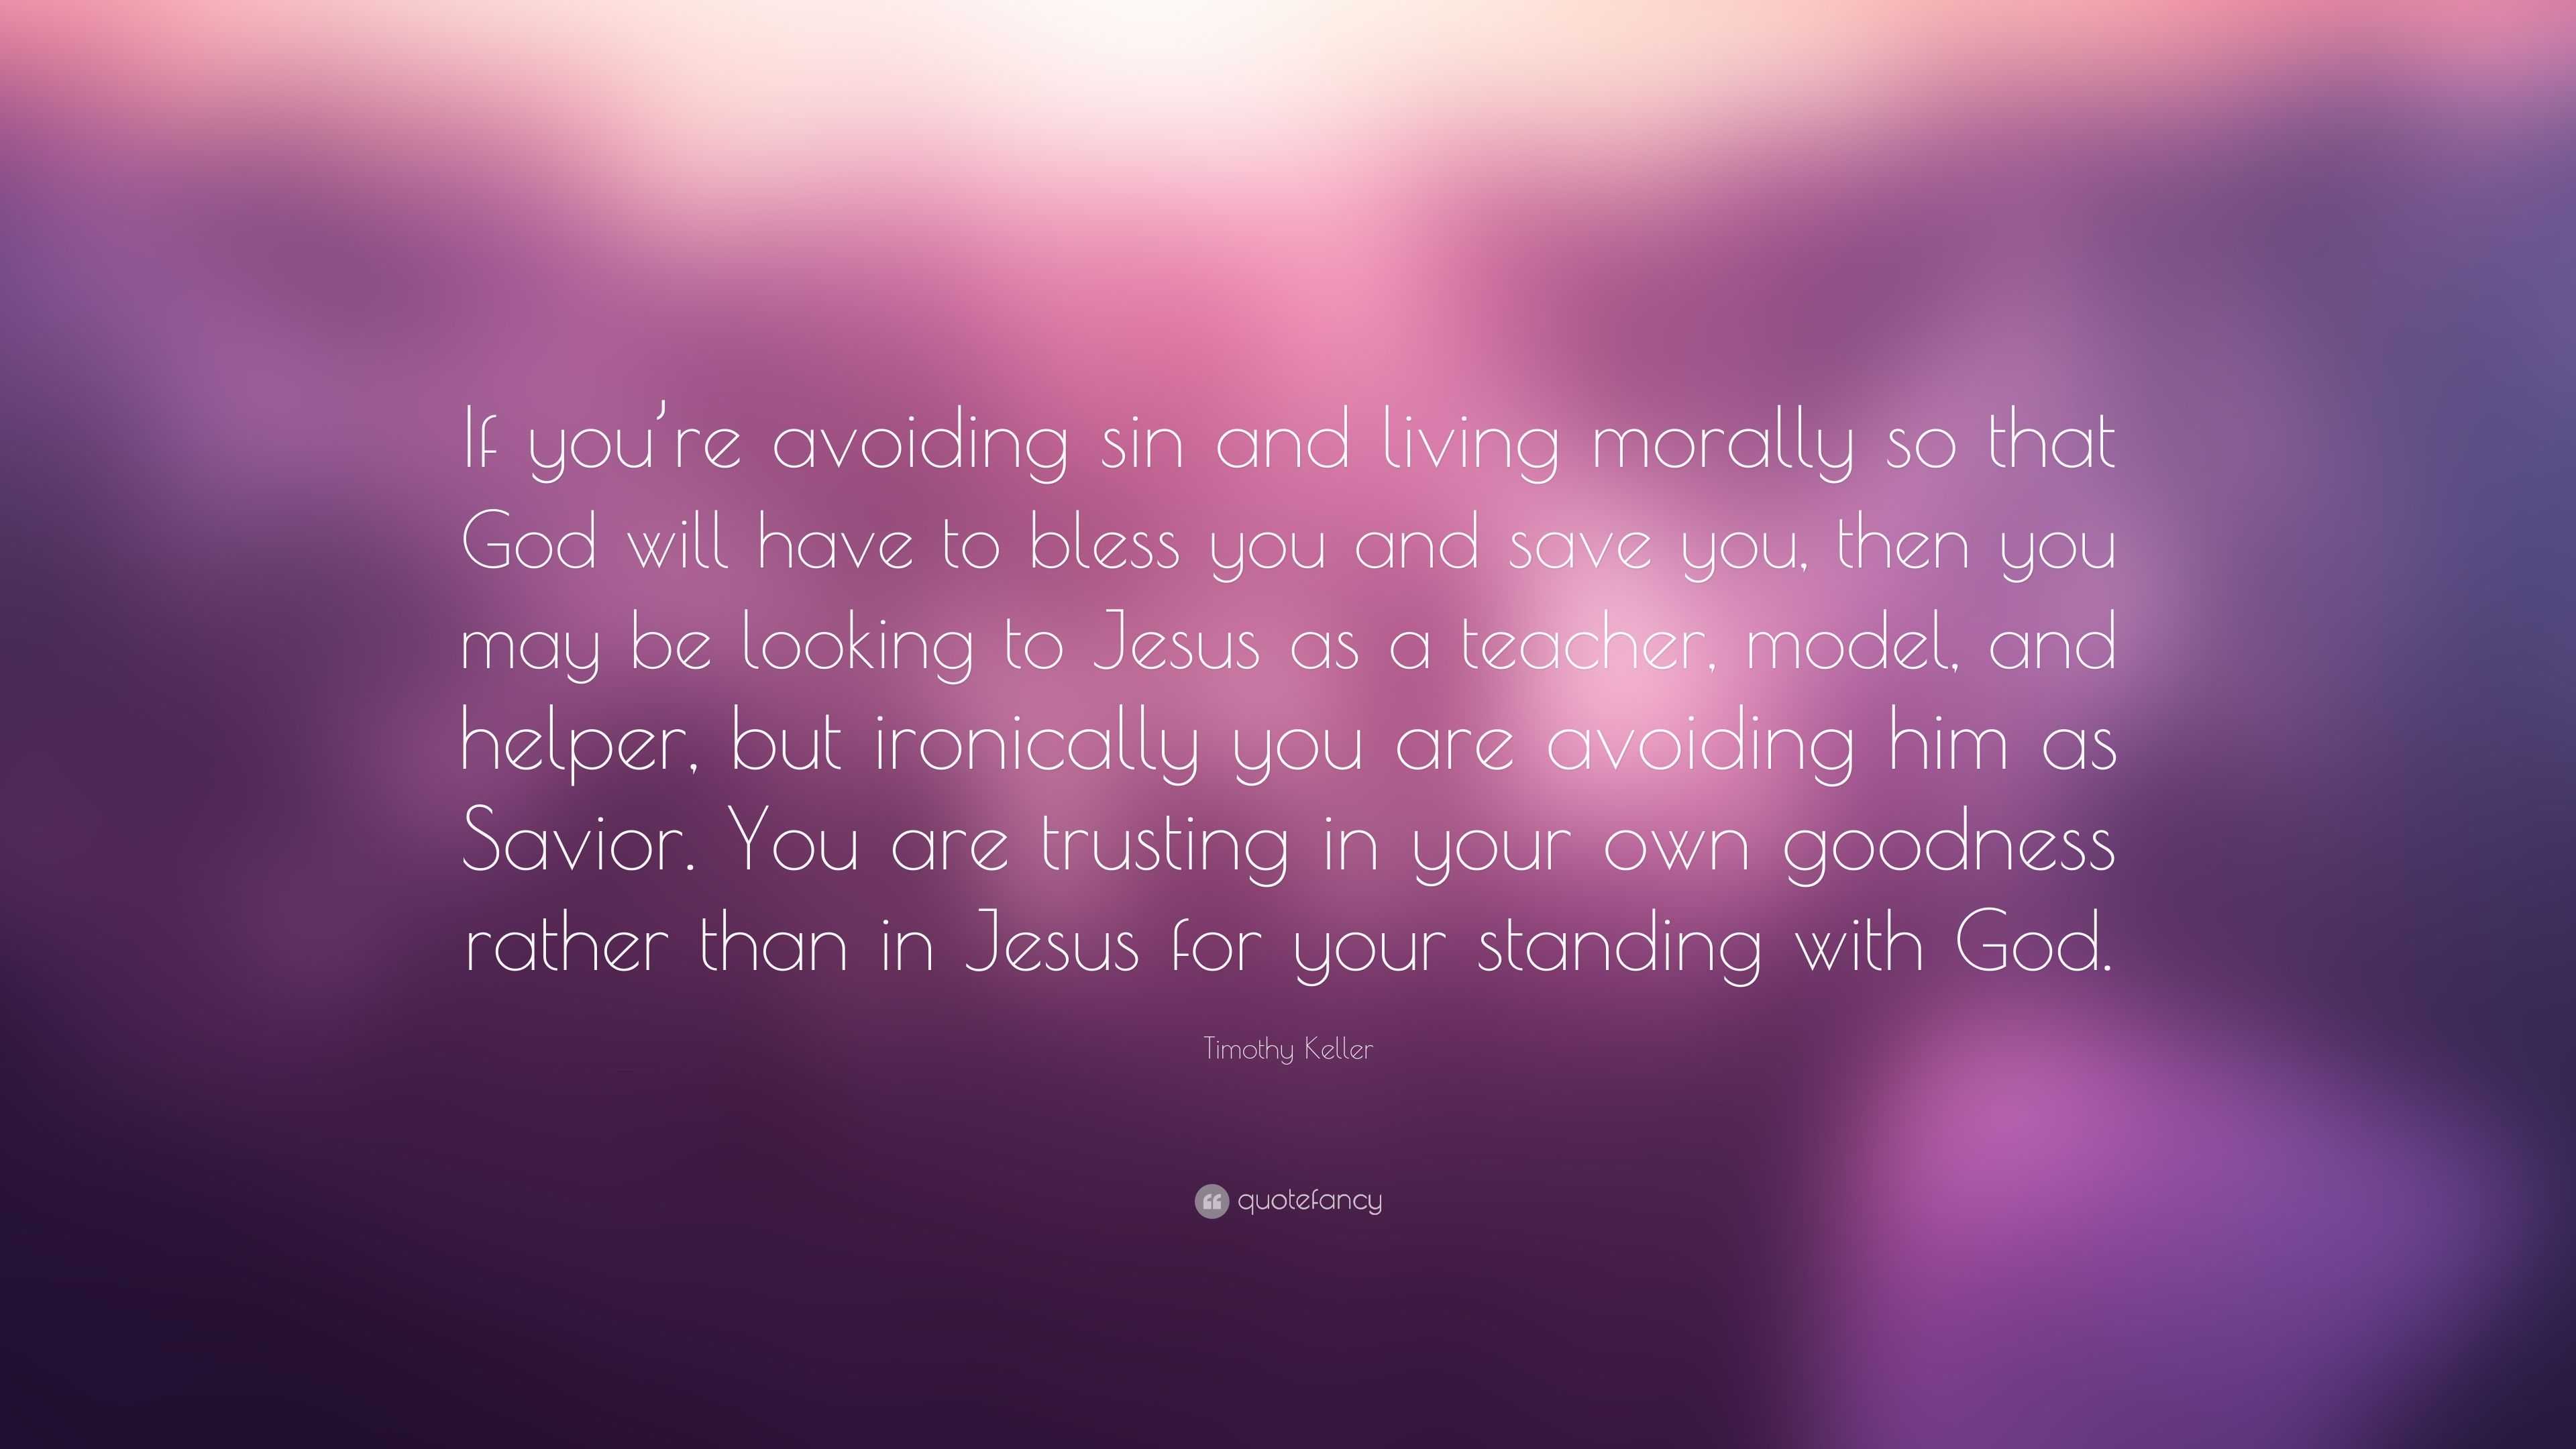 Timothy Keller Quote: “If you’re avoiding sin and living morally so ...